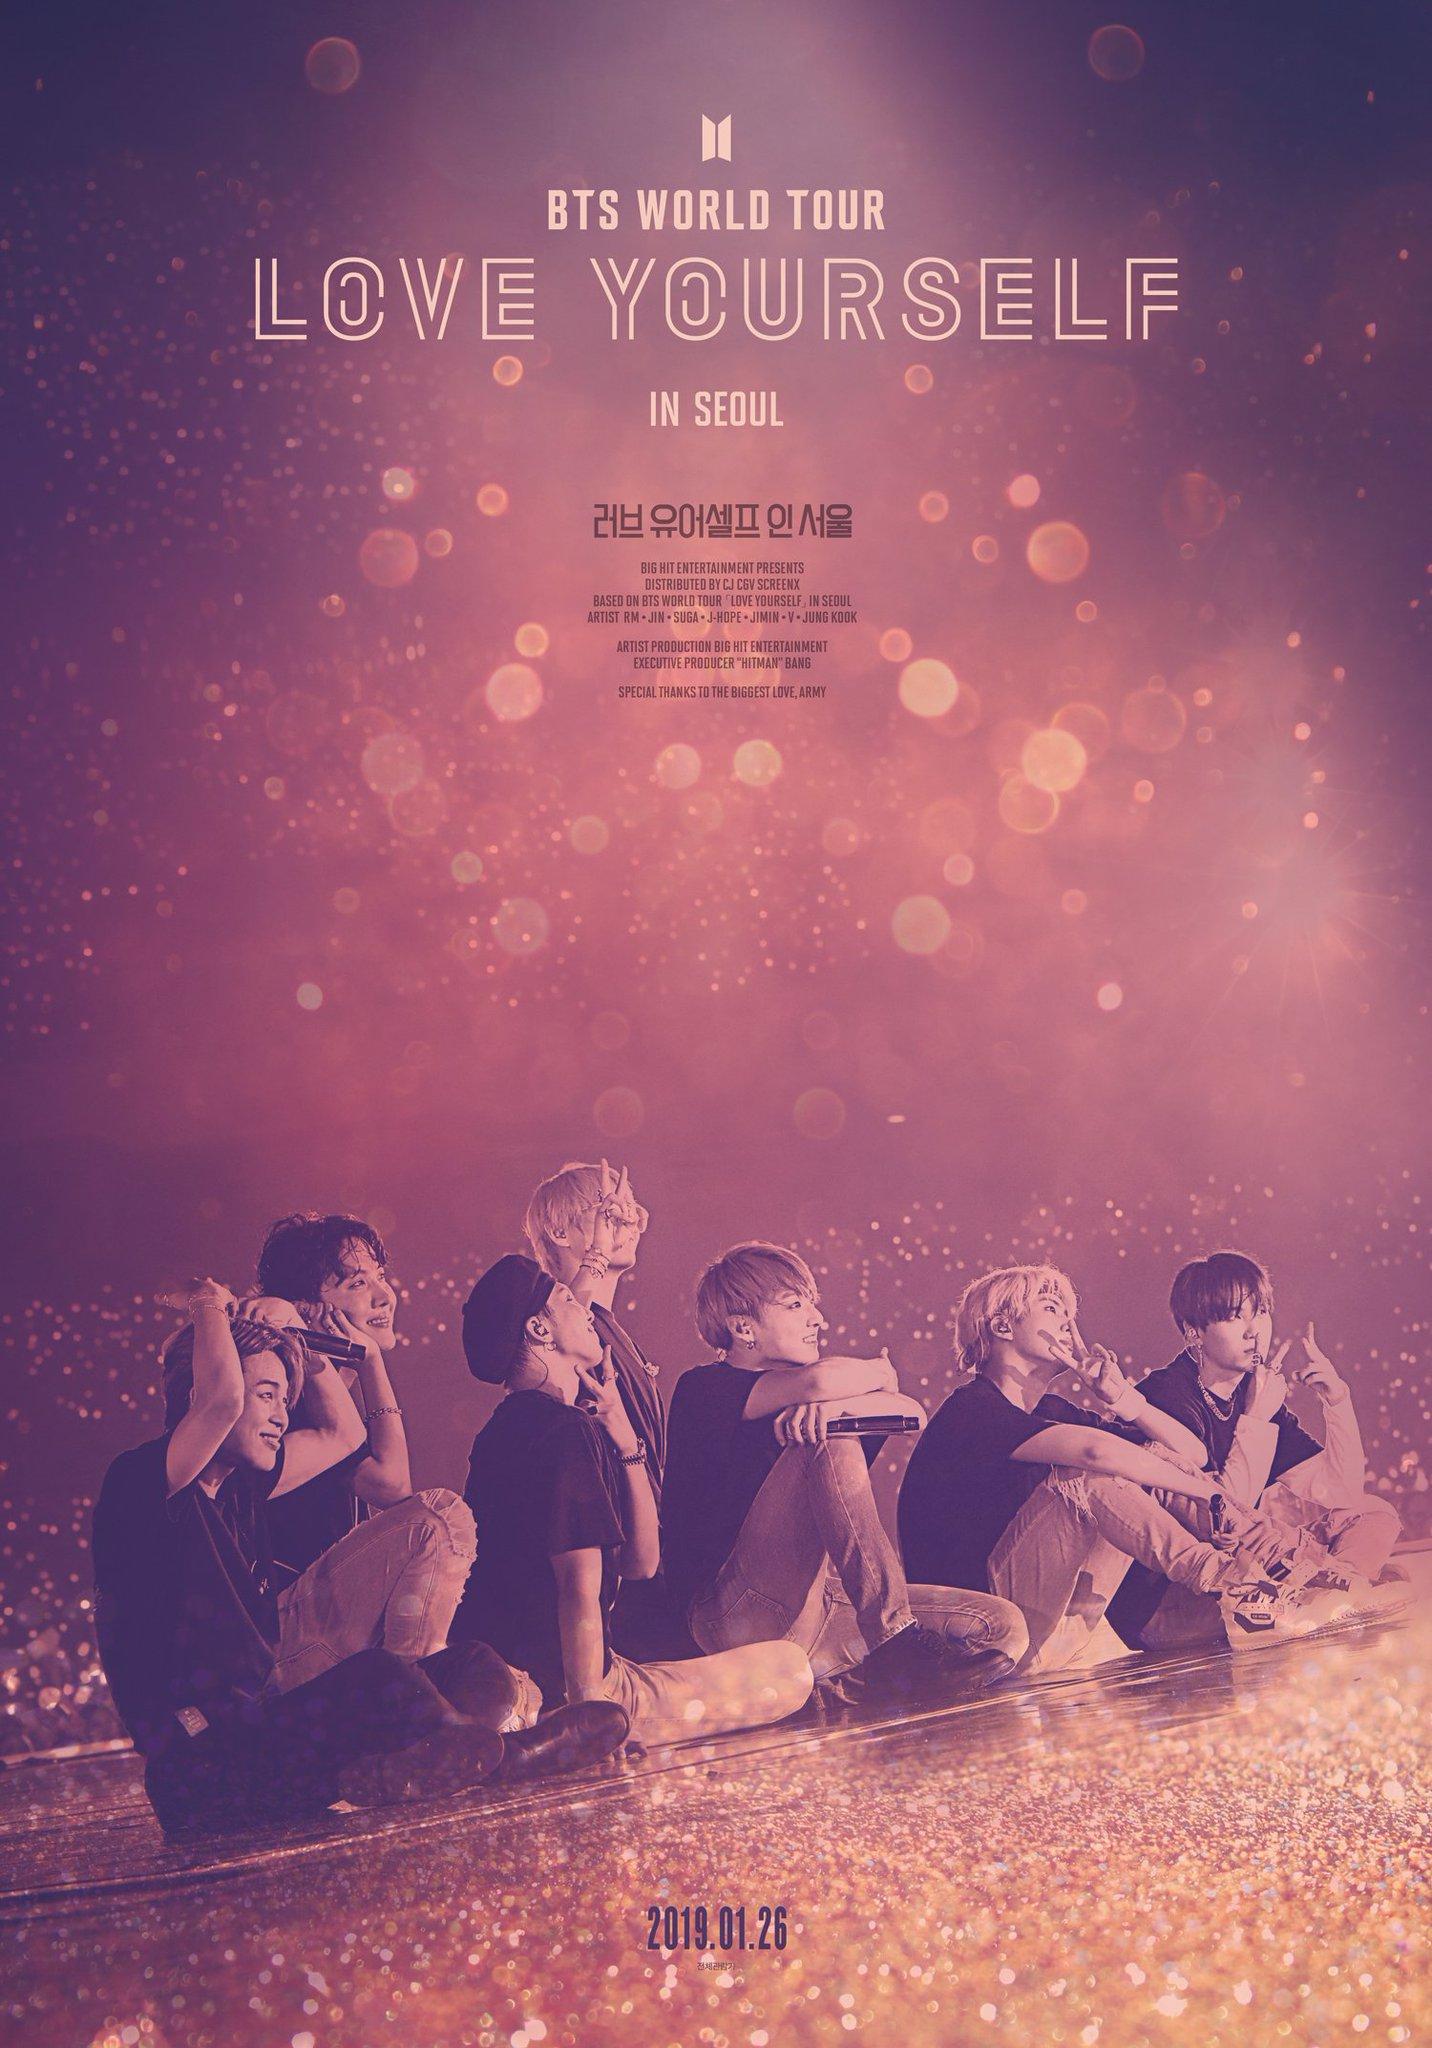 Download BTS image Love Yourself Seoul Poster HD wallpaper